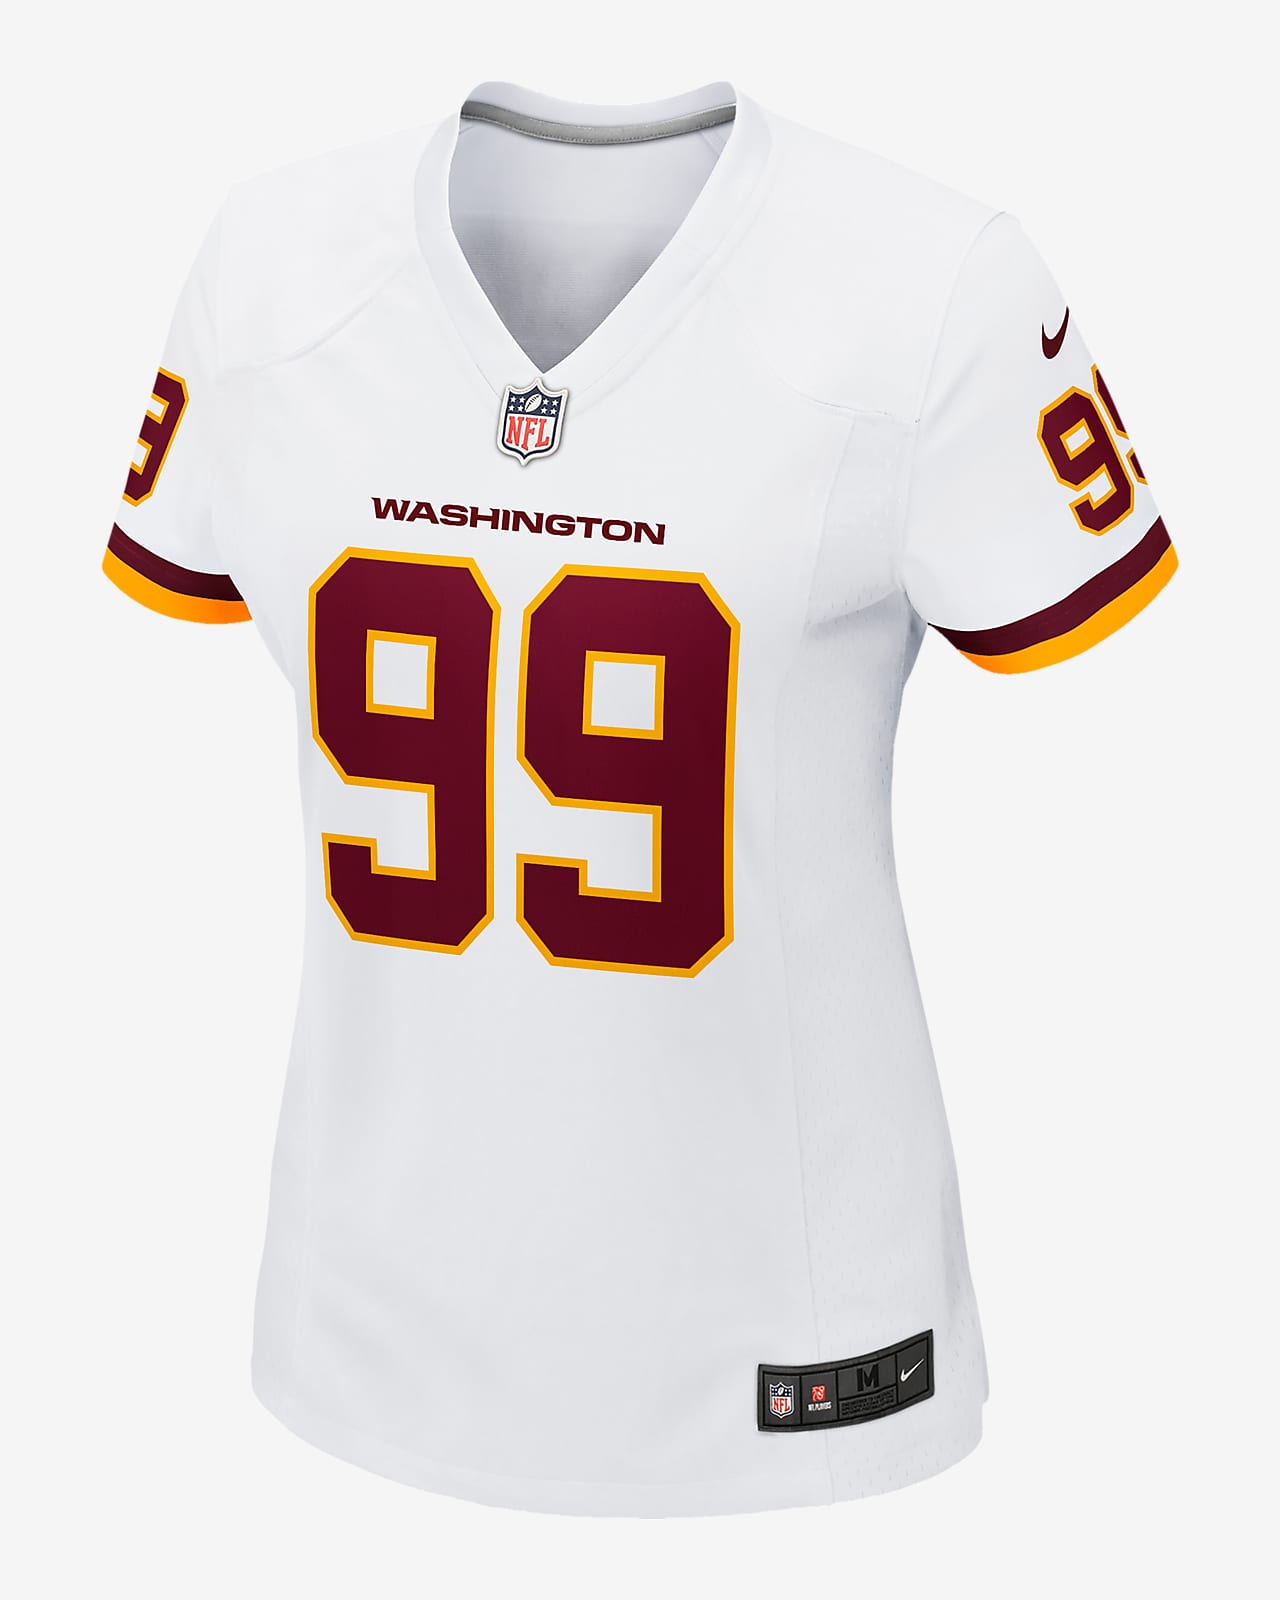 nfl teams with white jerseys